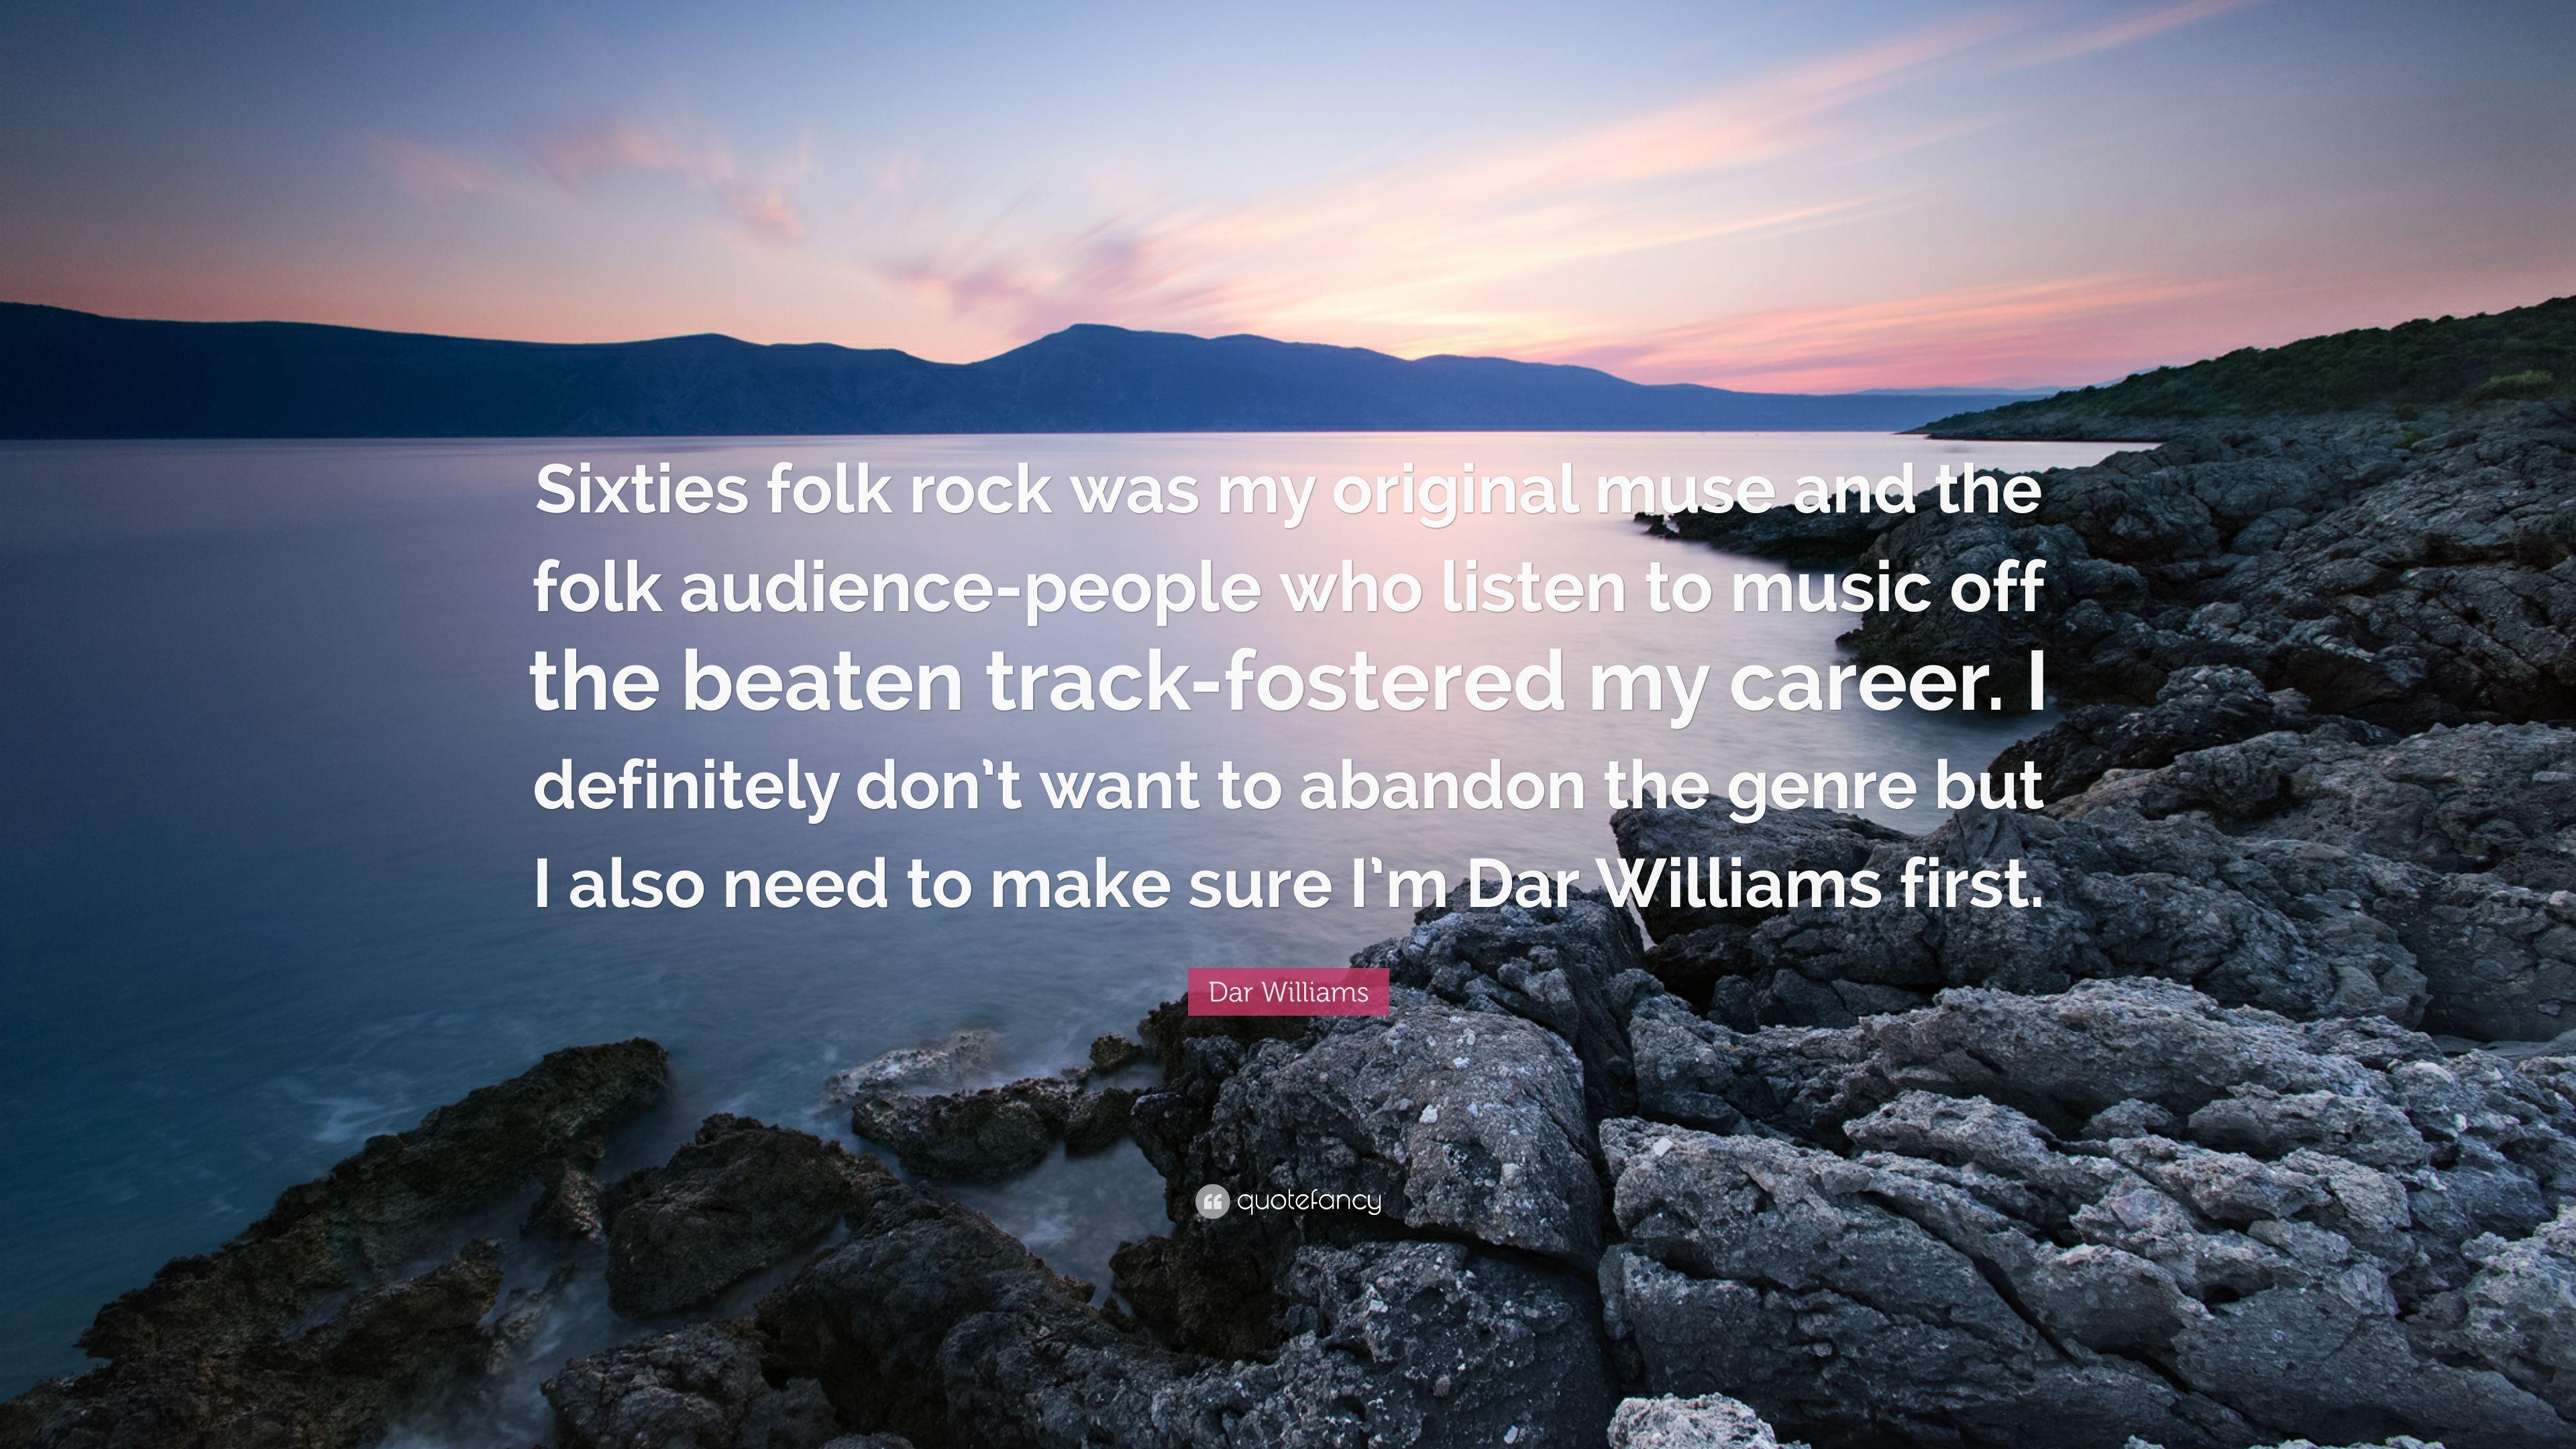 Dar Williams Quote: “Sixties folk rock was my original muse and